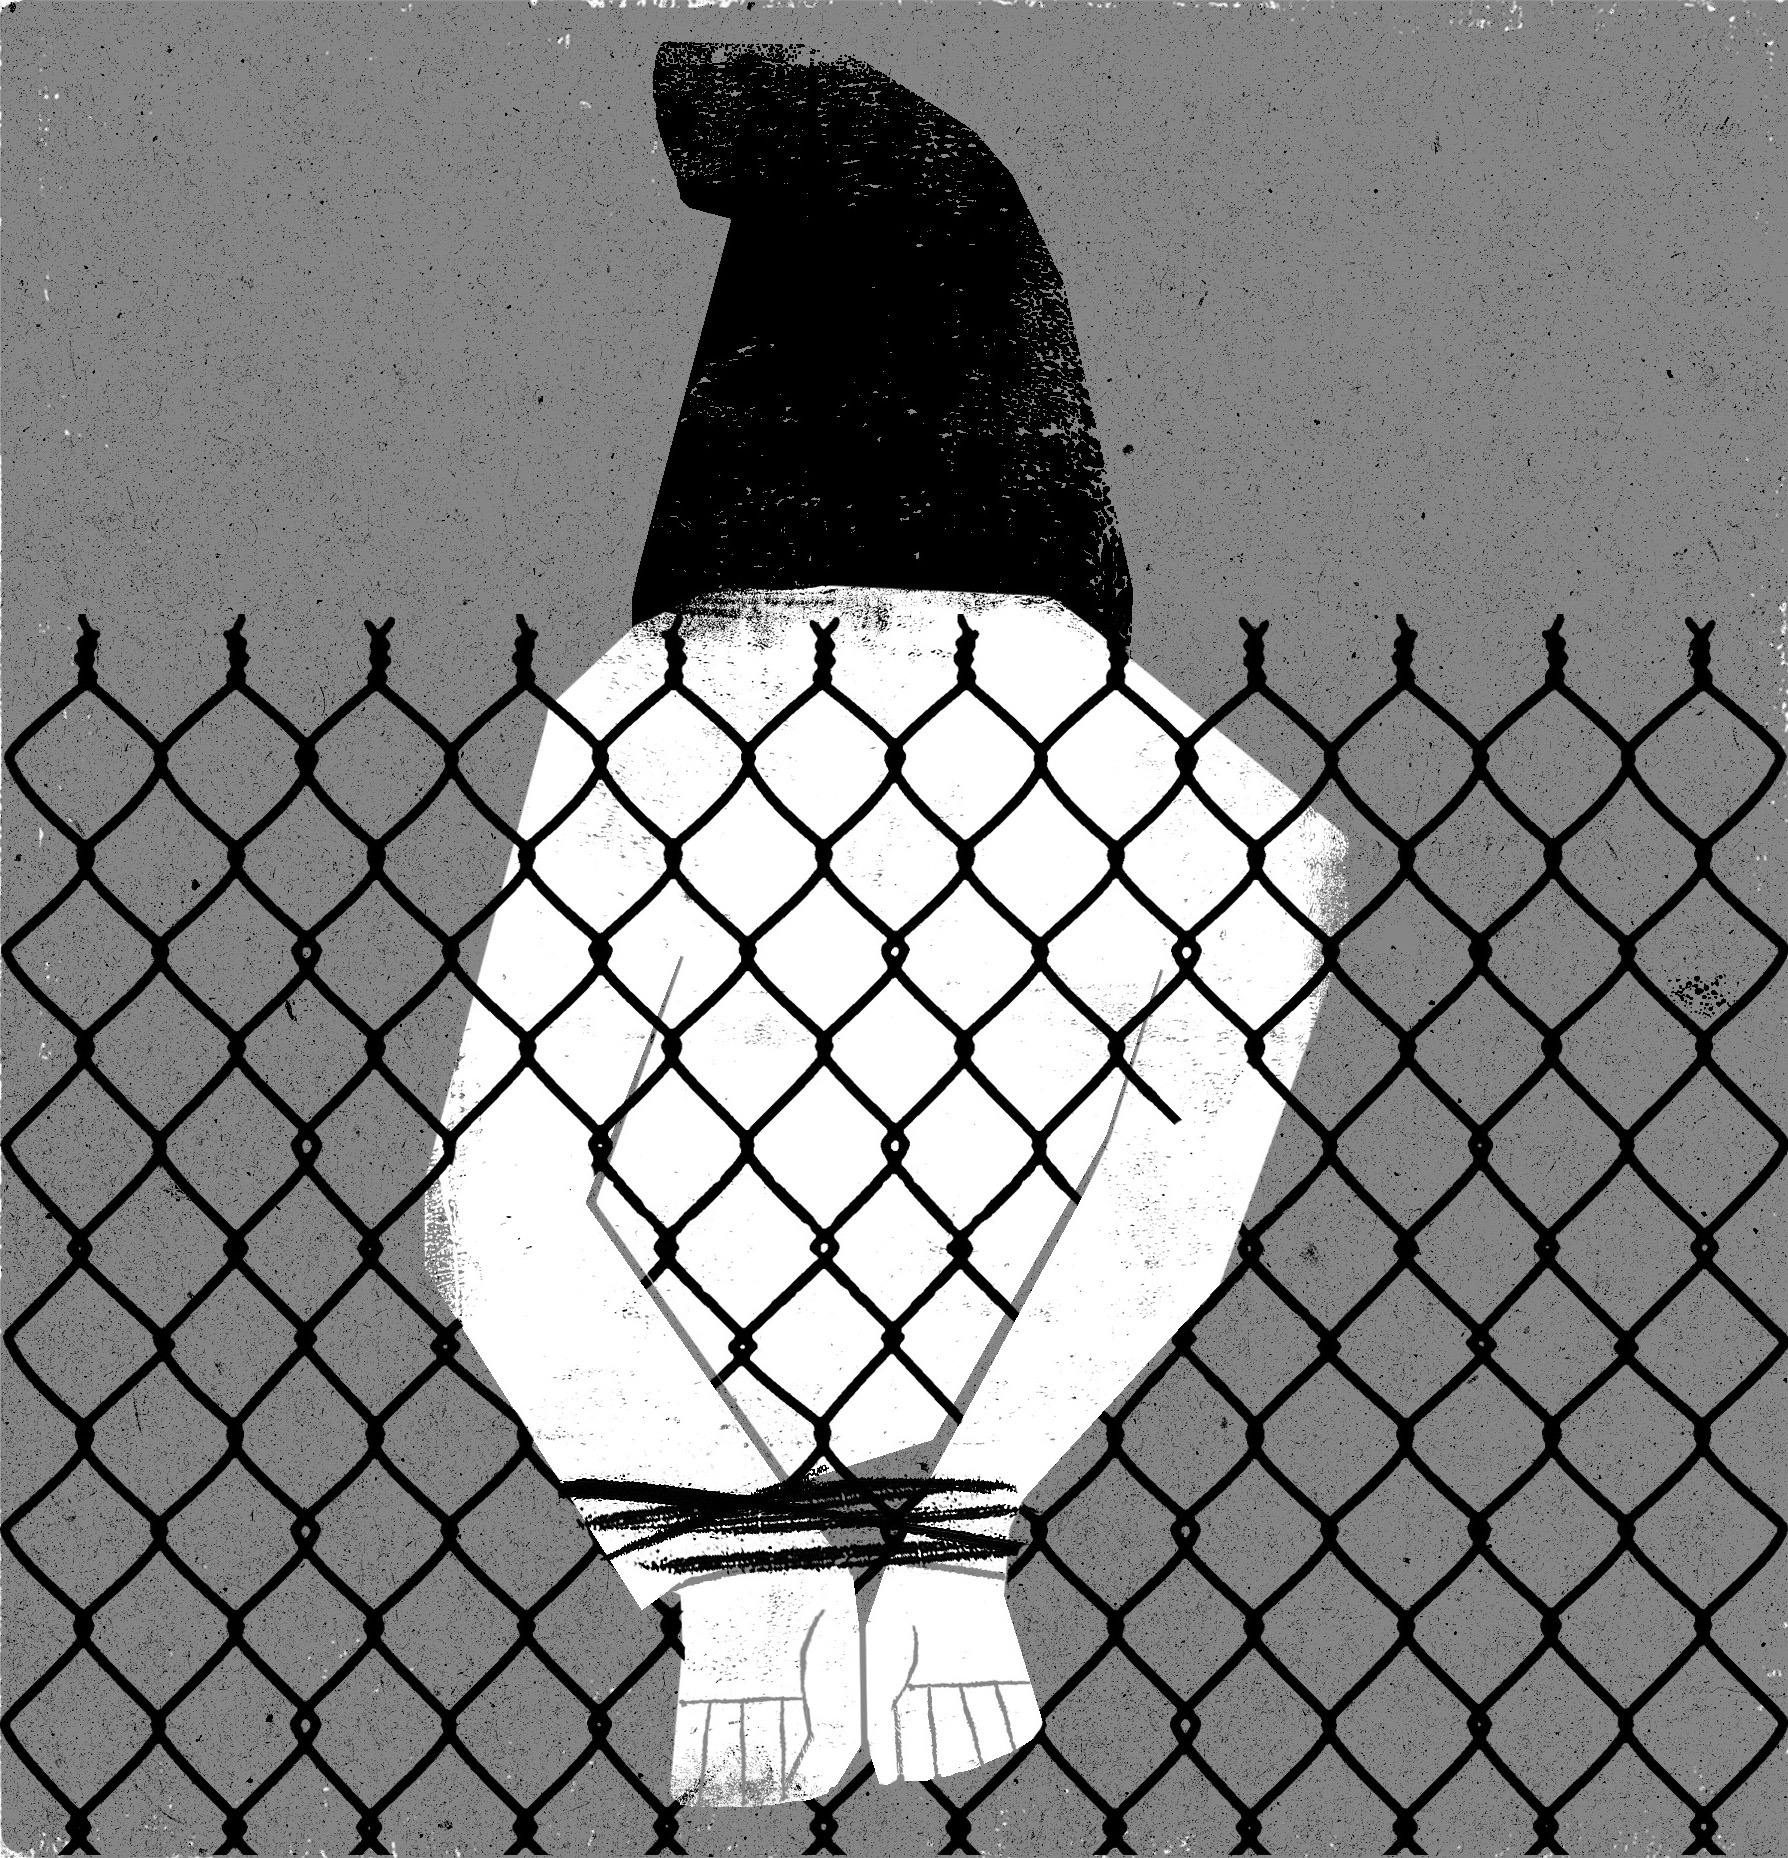 Trial Without End in Guantánamo